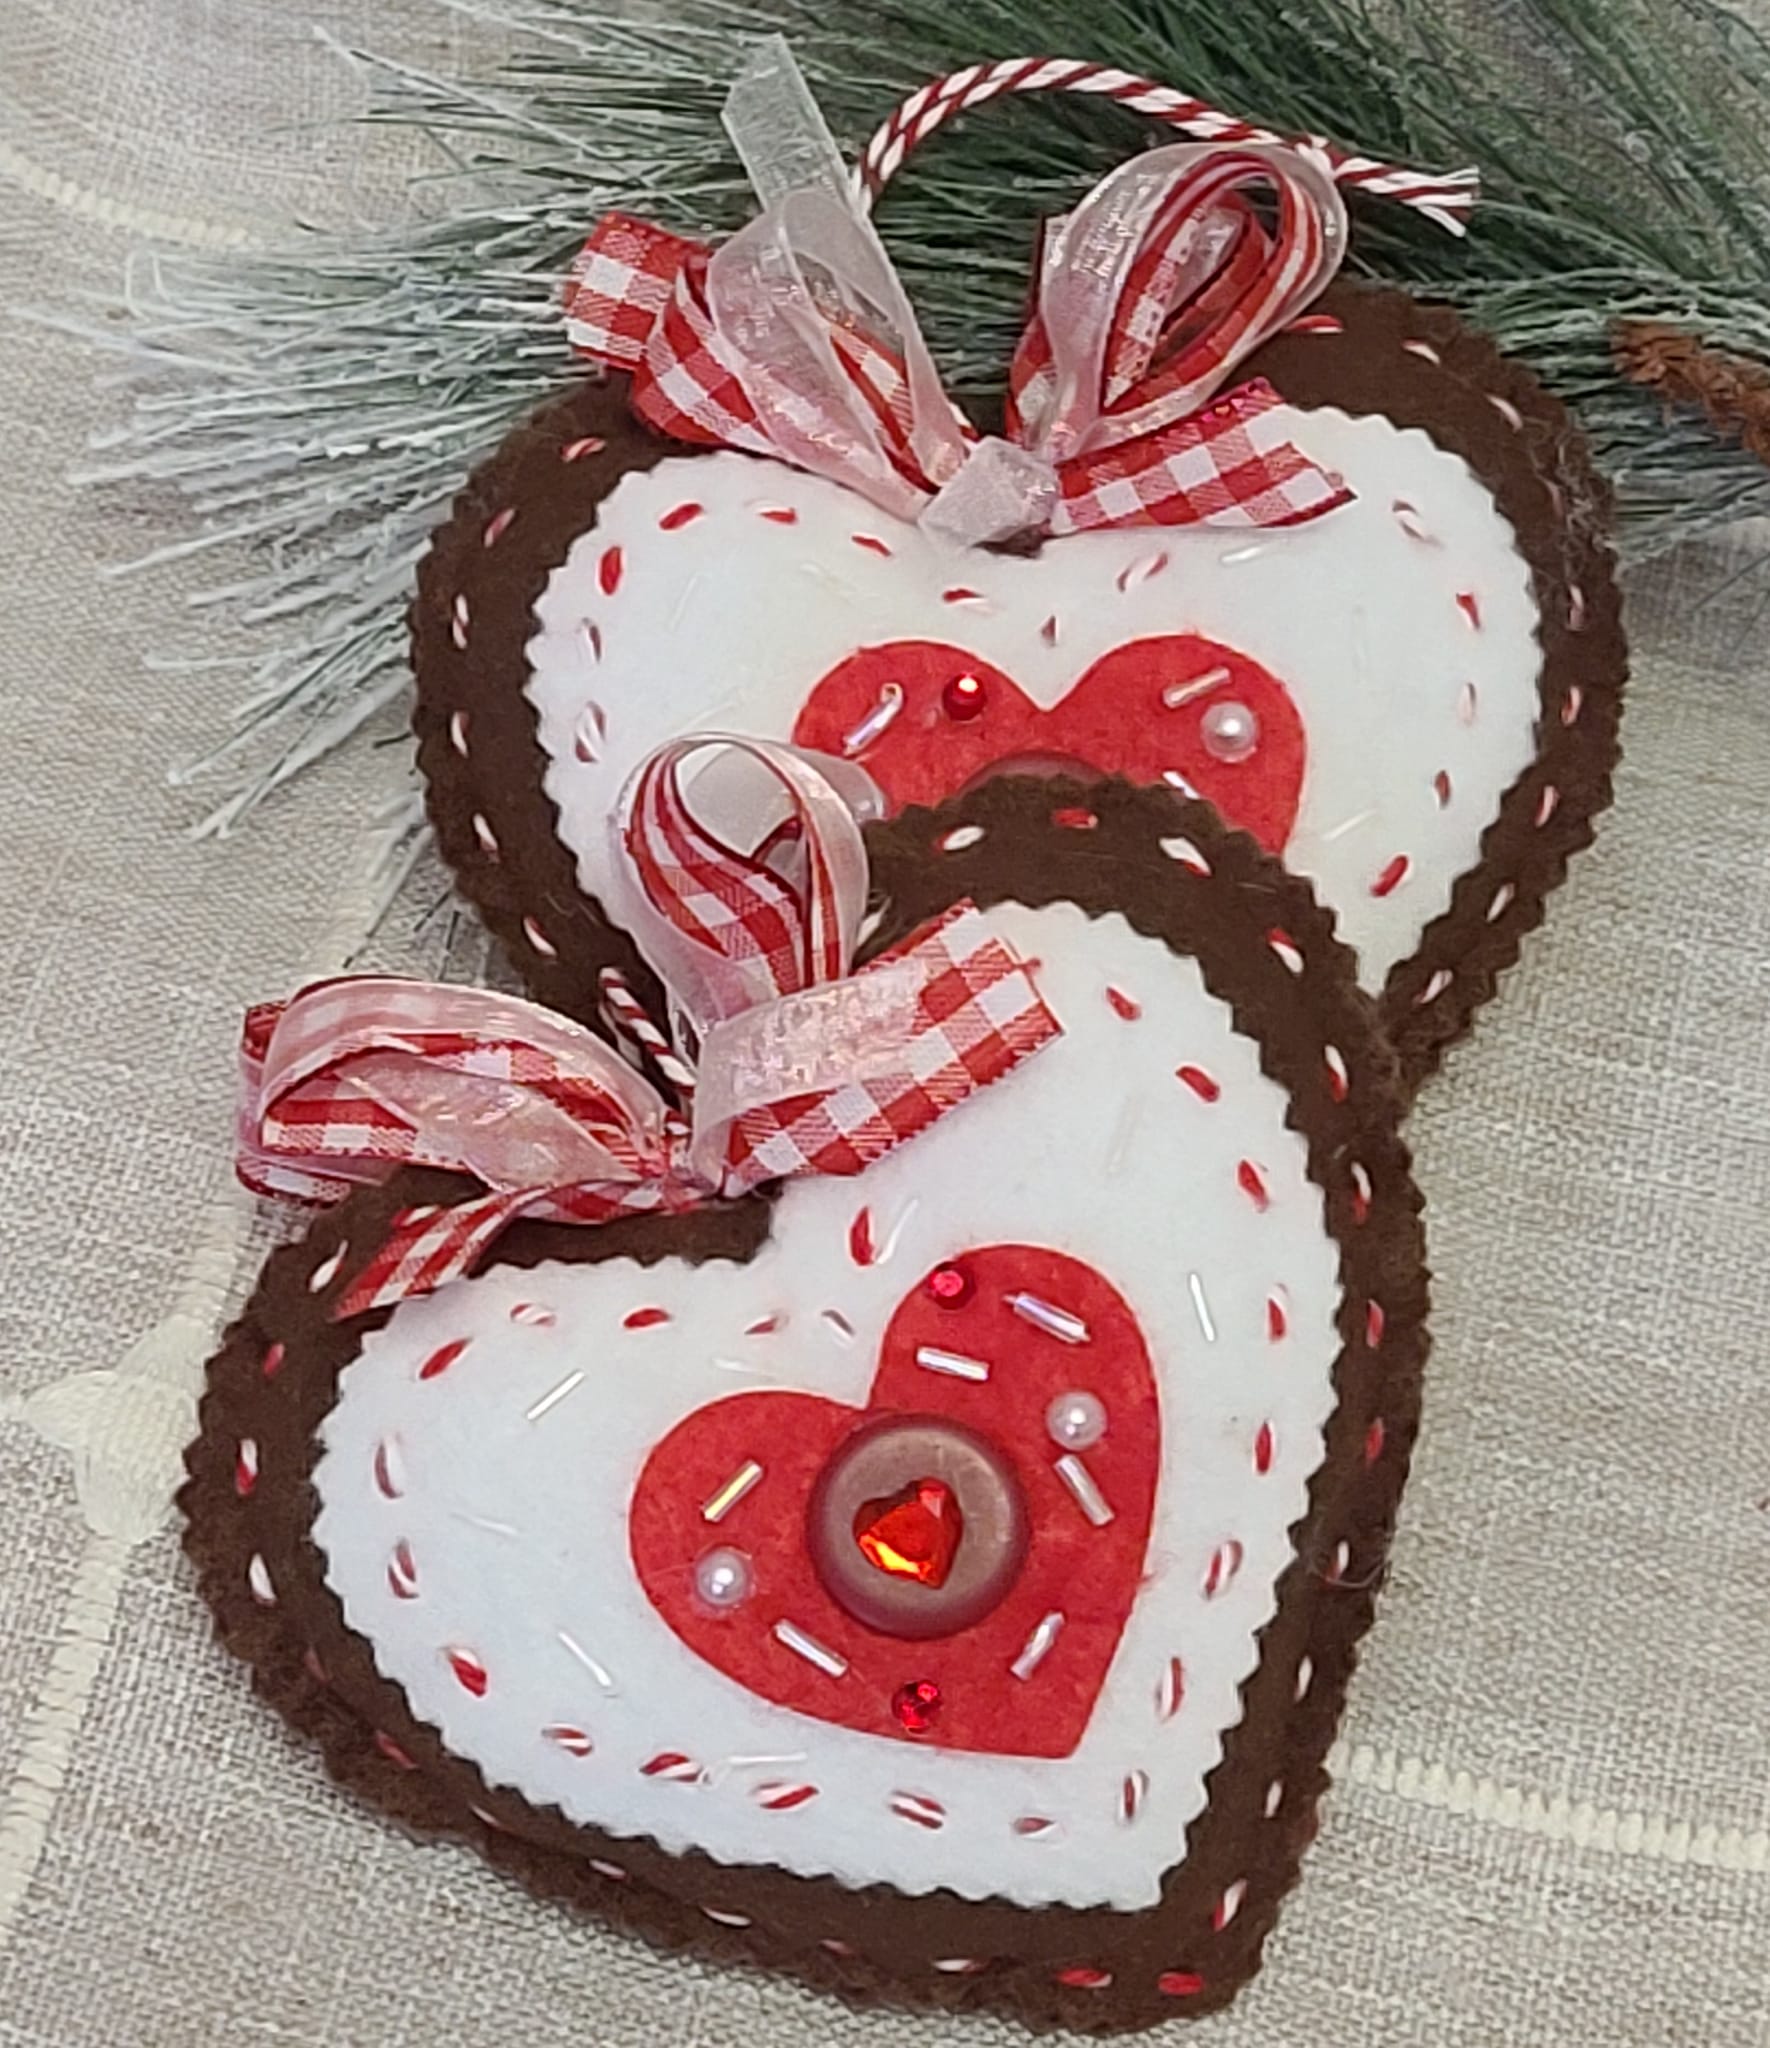 Felt chocolate red heart with gingham bow ornament